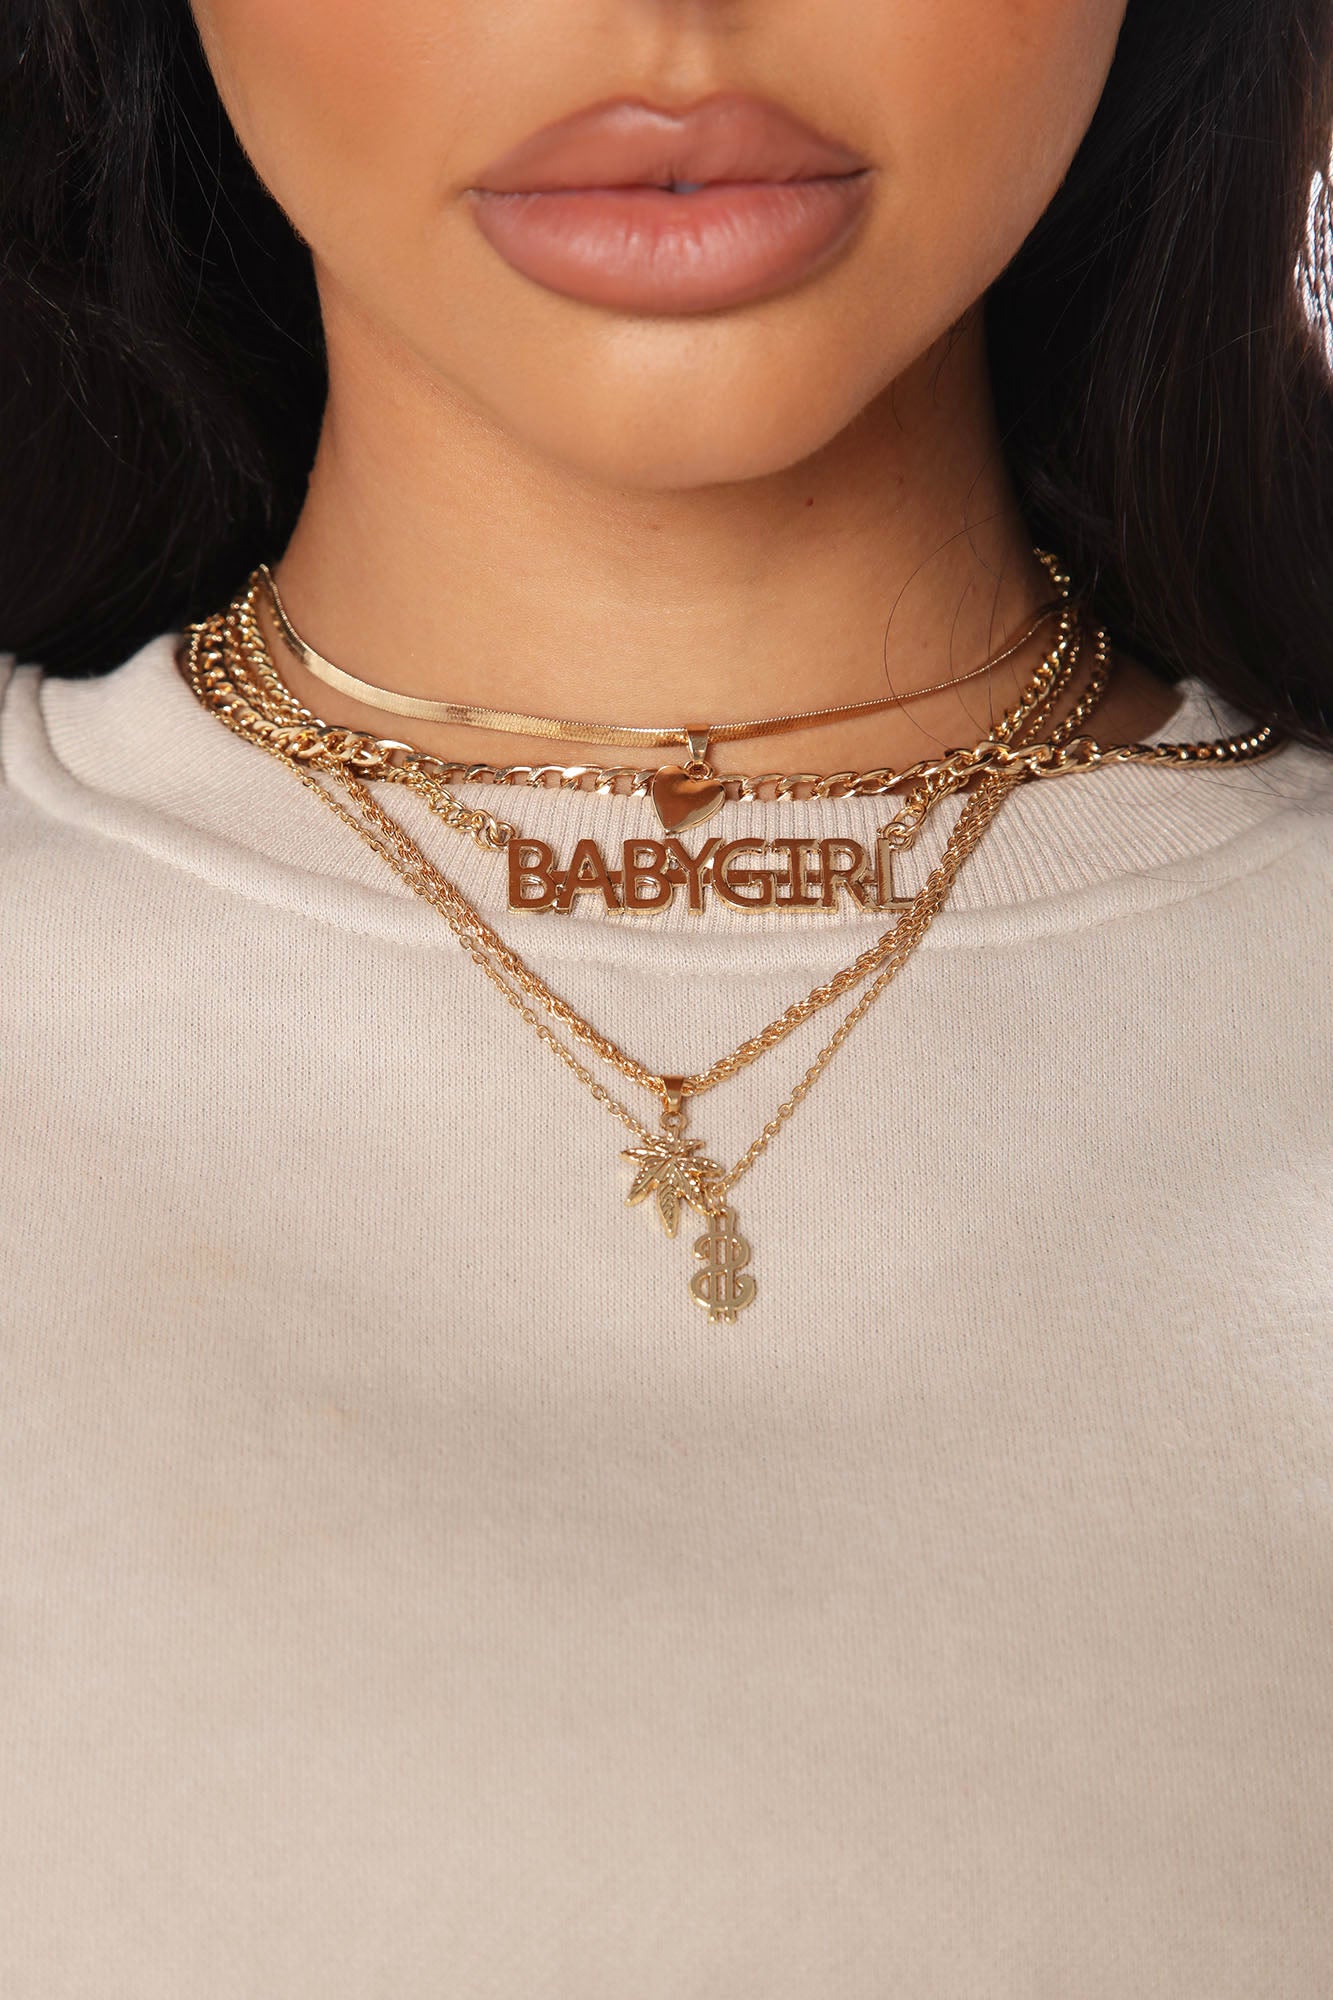 Buy Babygirl Necklace Babygirl Pendant Gift for Girlfriend 18K Gold  Babygirl Necklace Jewelry for Best Friend Valentine's Day Gift Online in  India - Etsy